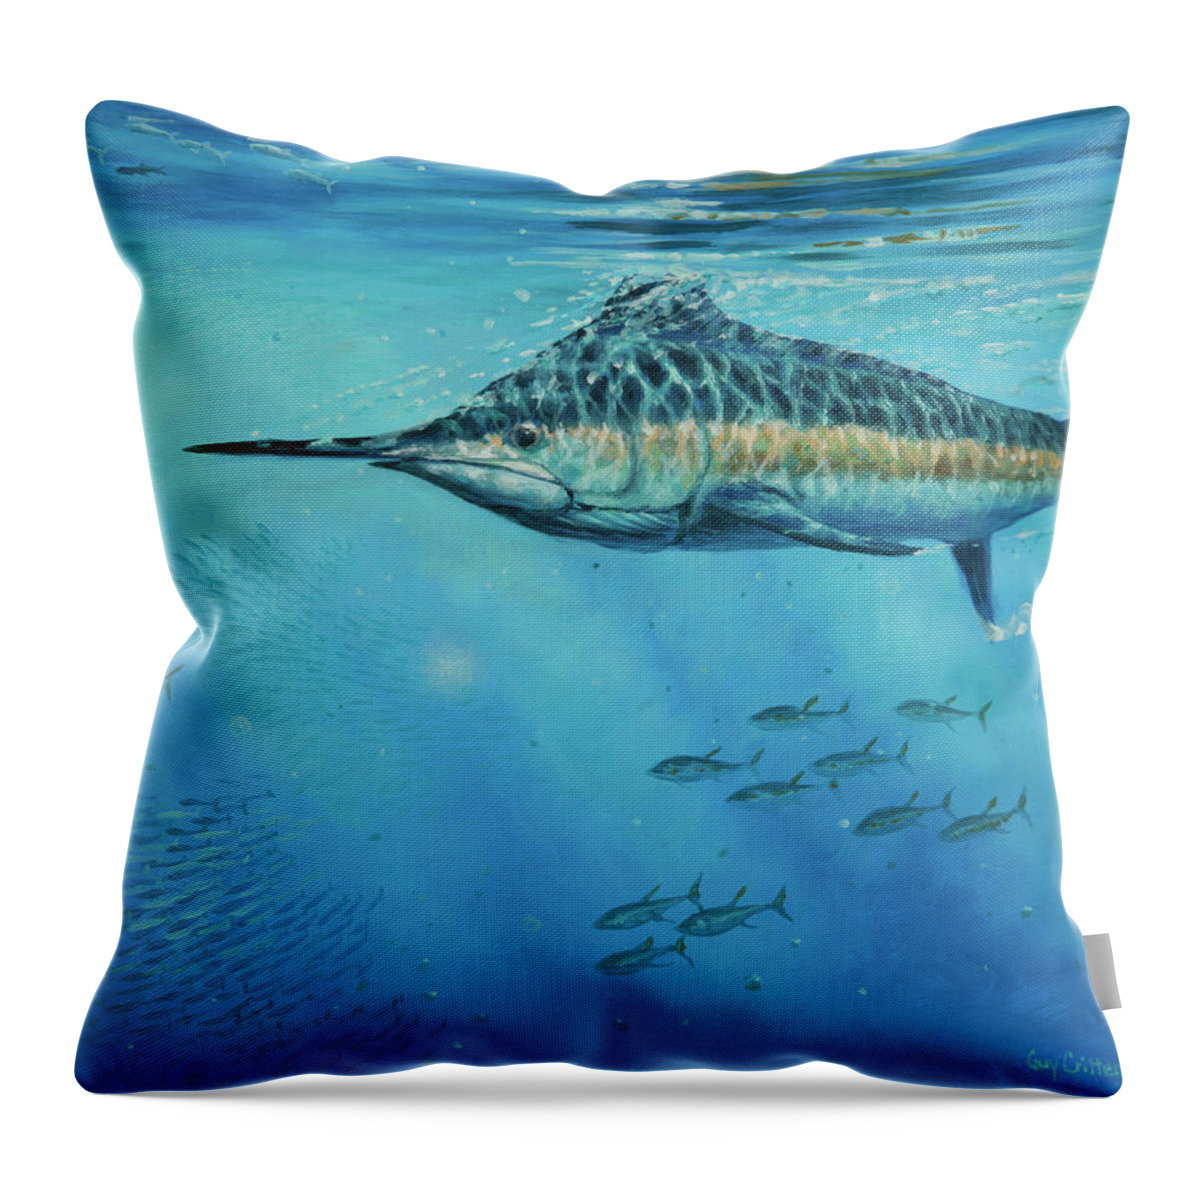 Blue Marlin Paintings Throw Pillow featuring the painting Cruise Missle by Guy Crittenden